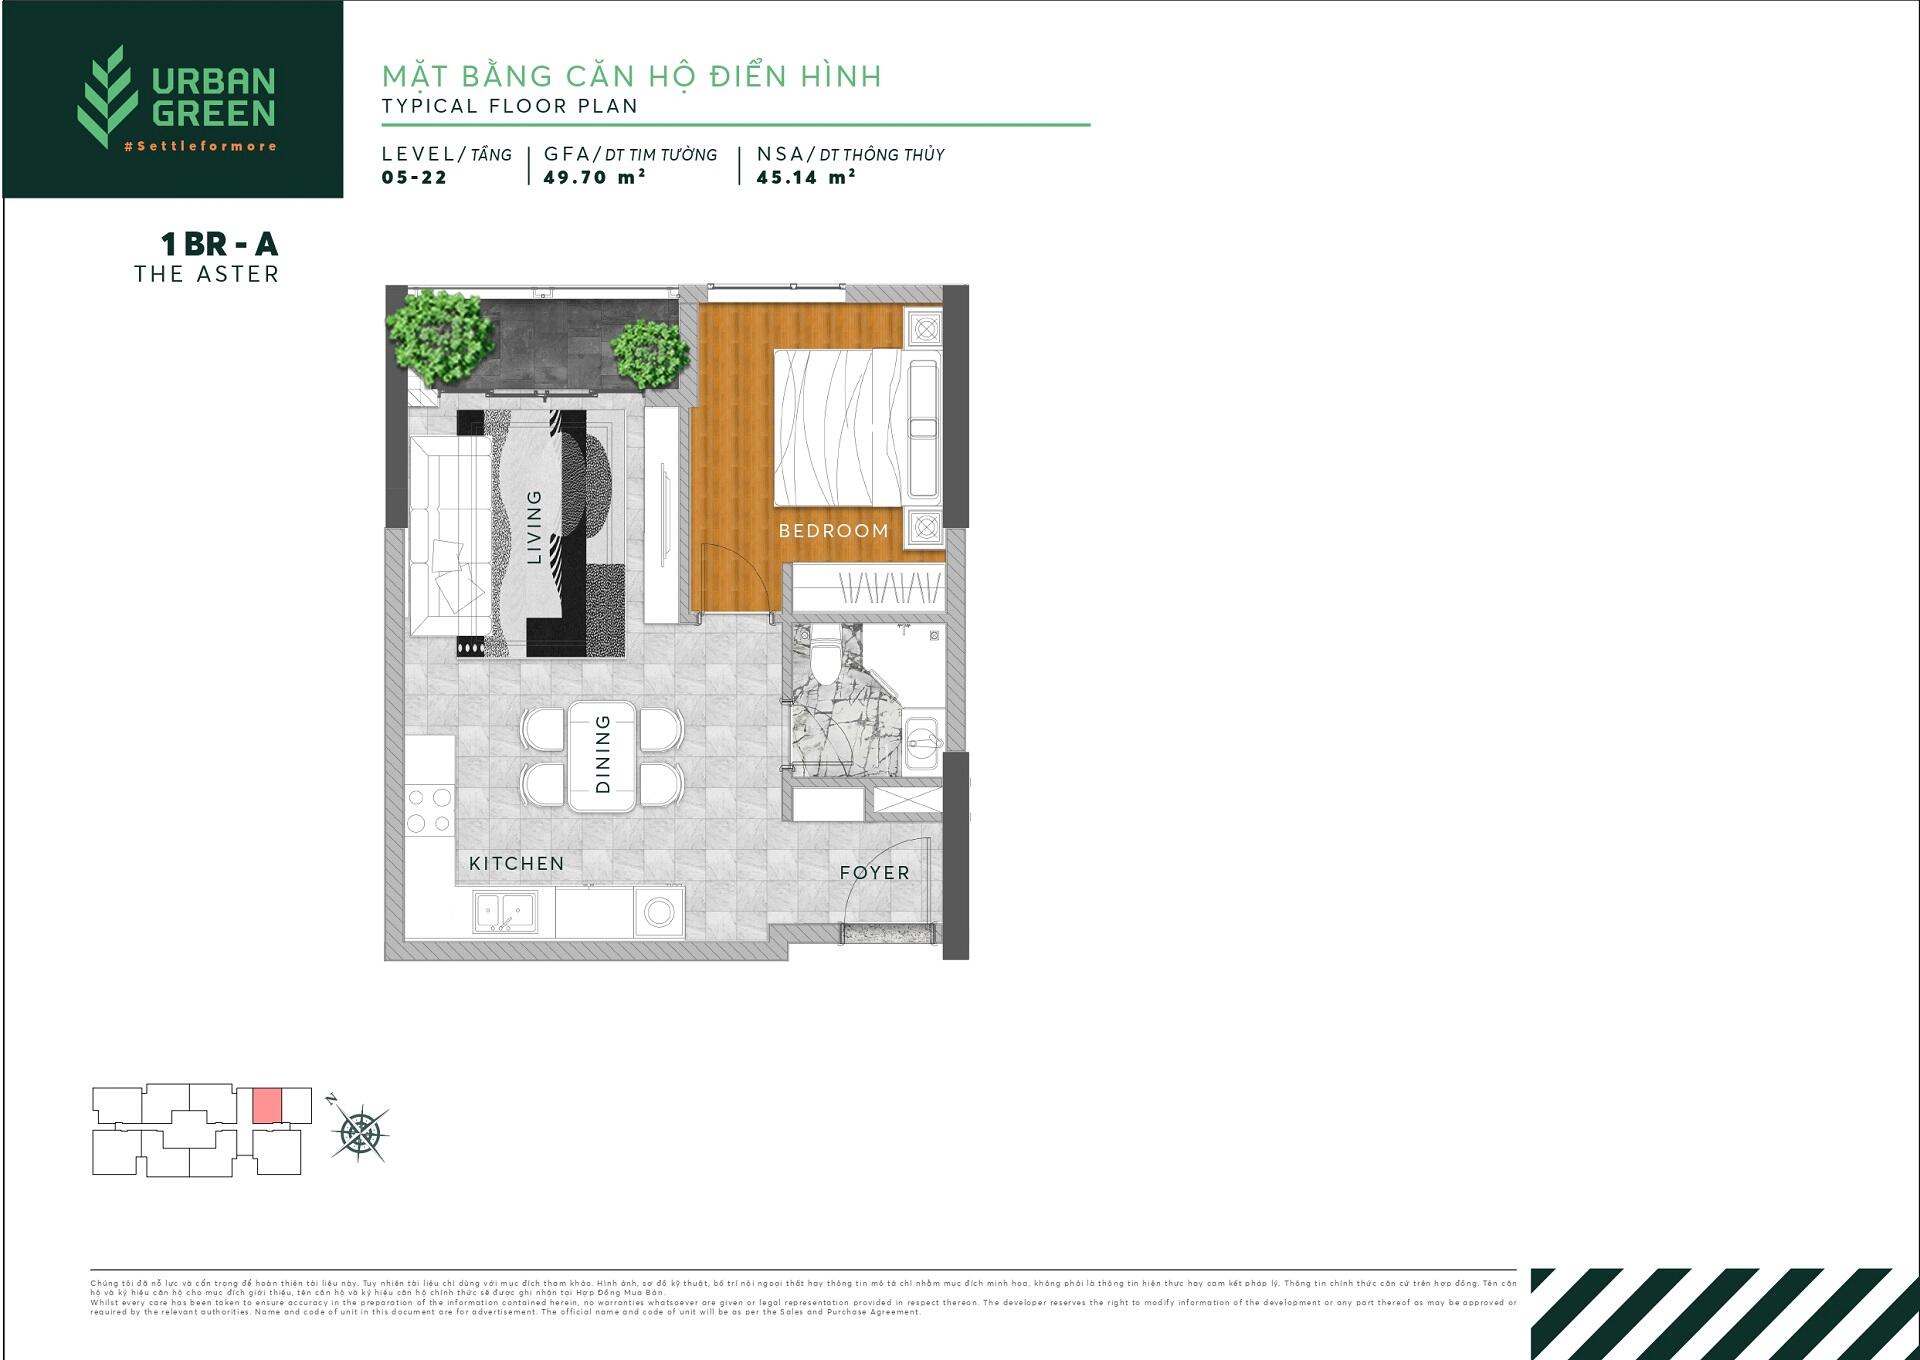 The layout of The Aster apartment 1 bedroom 1BR - A